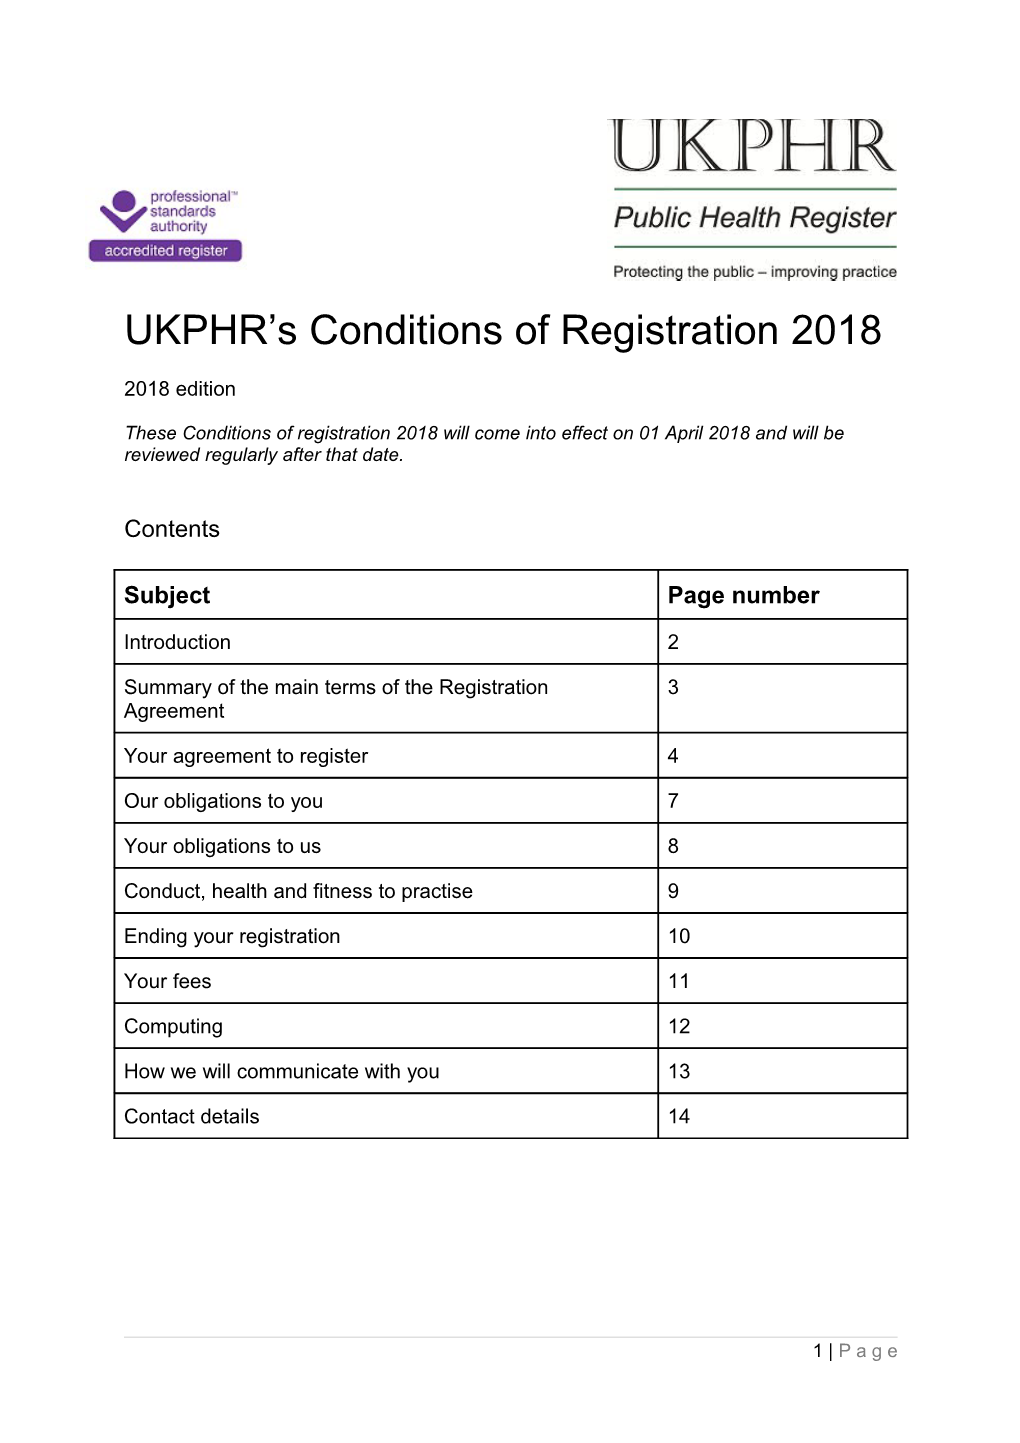 About These Conditions of Registration